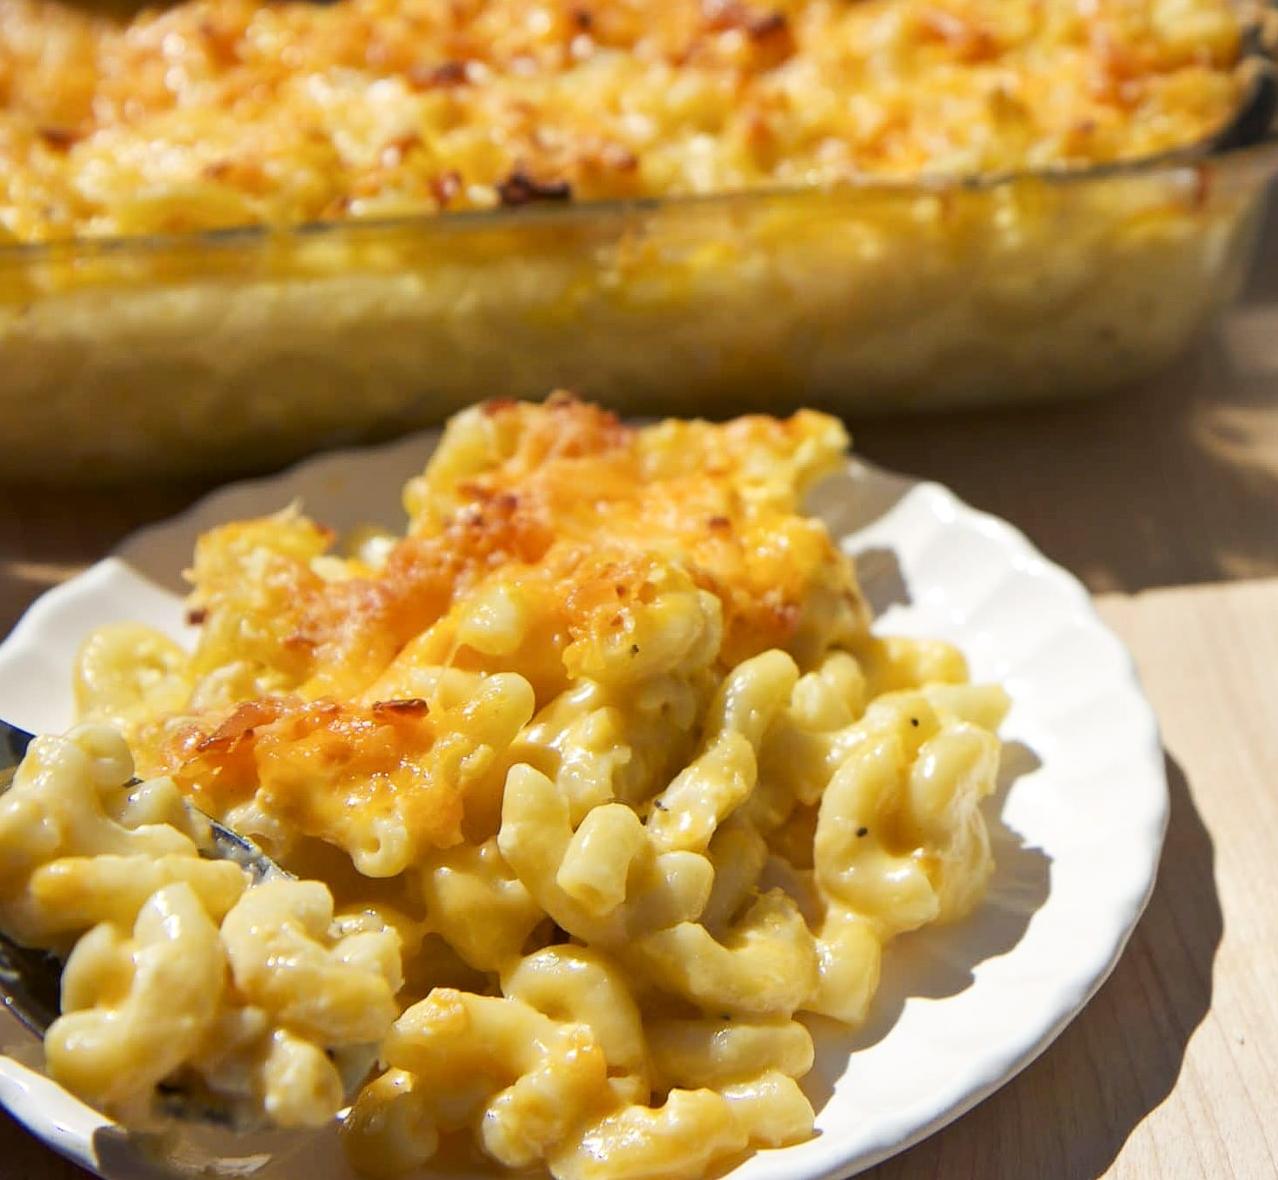  Get ready to dig in to the ultimate comfort food with this Southern-style mac and cheese.